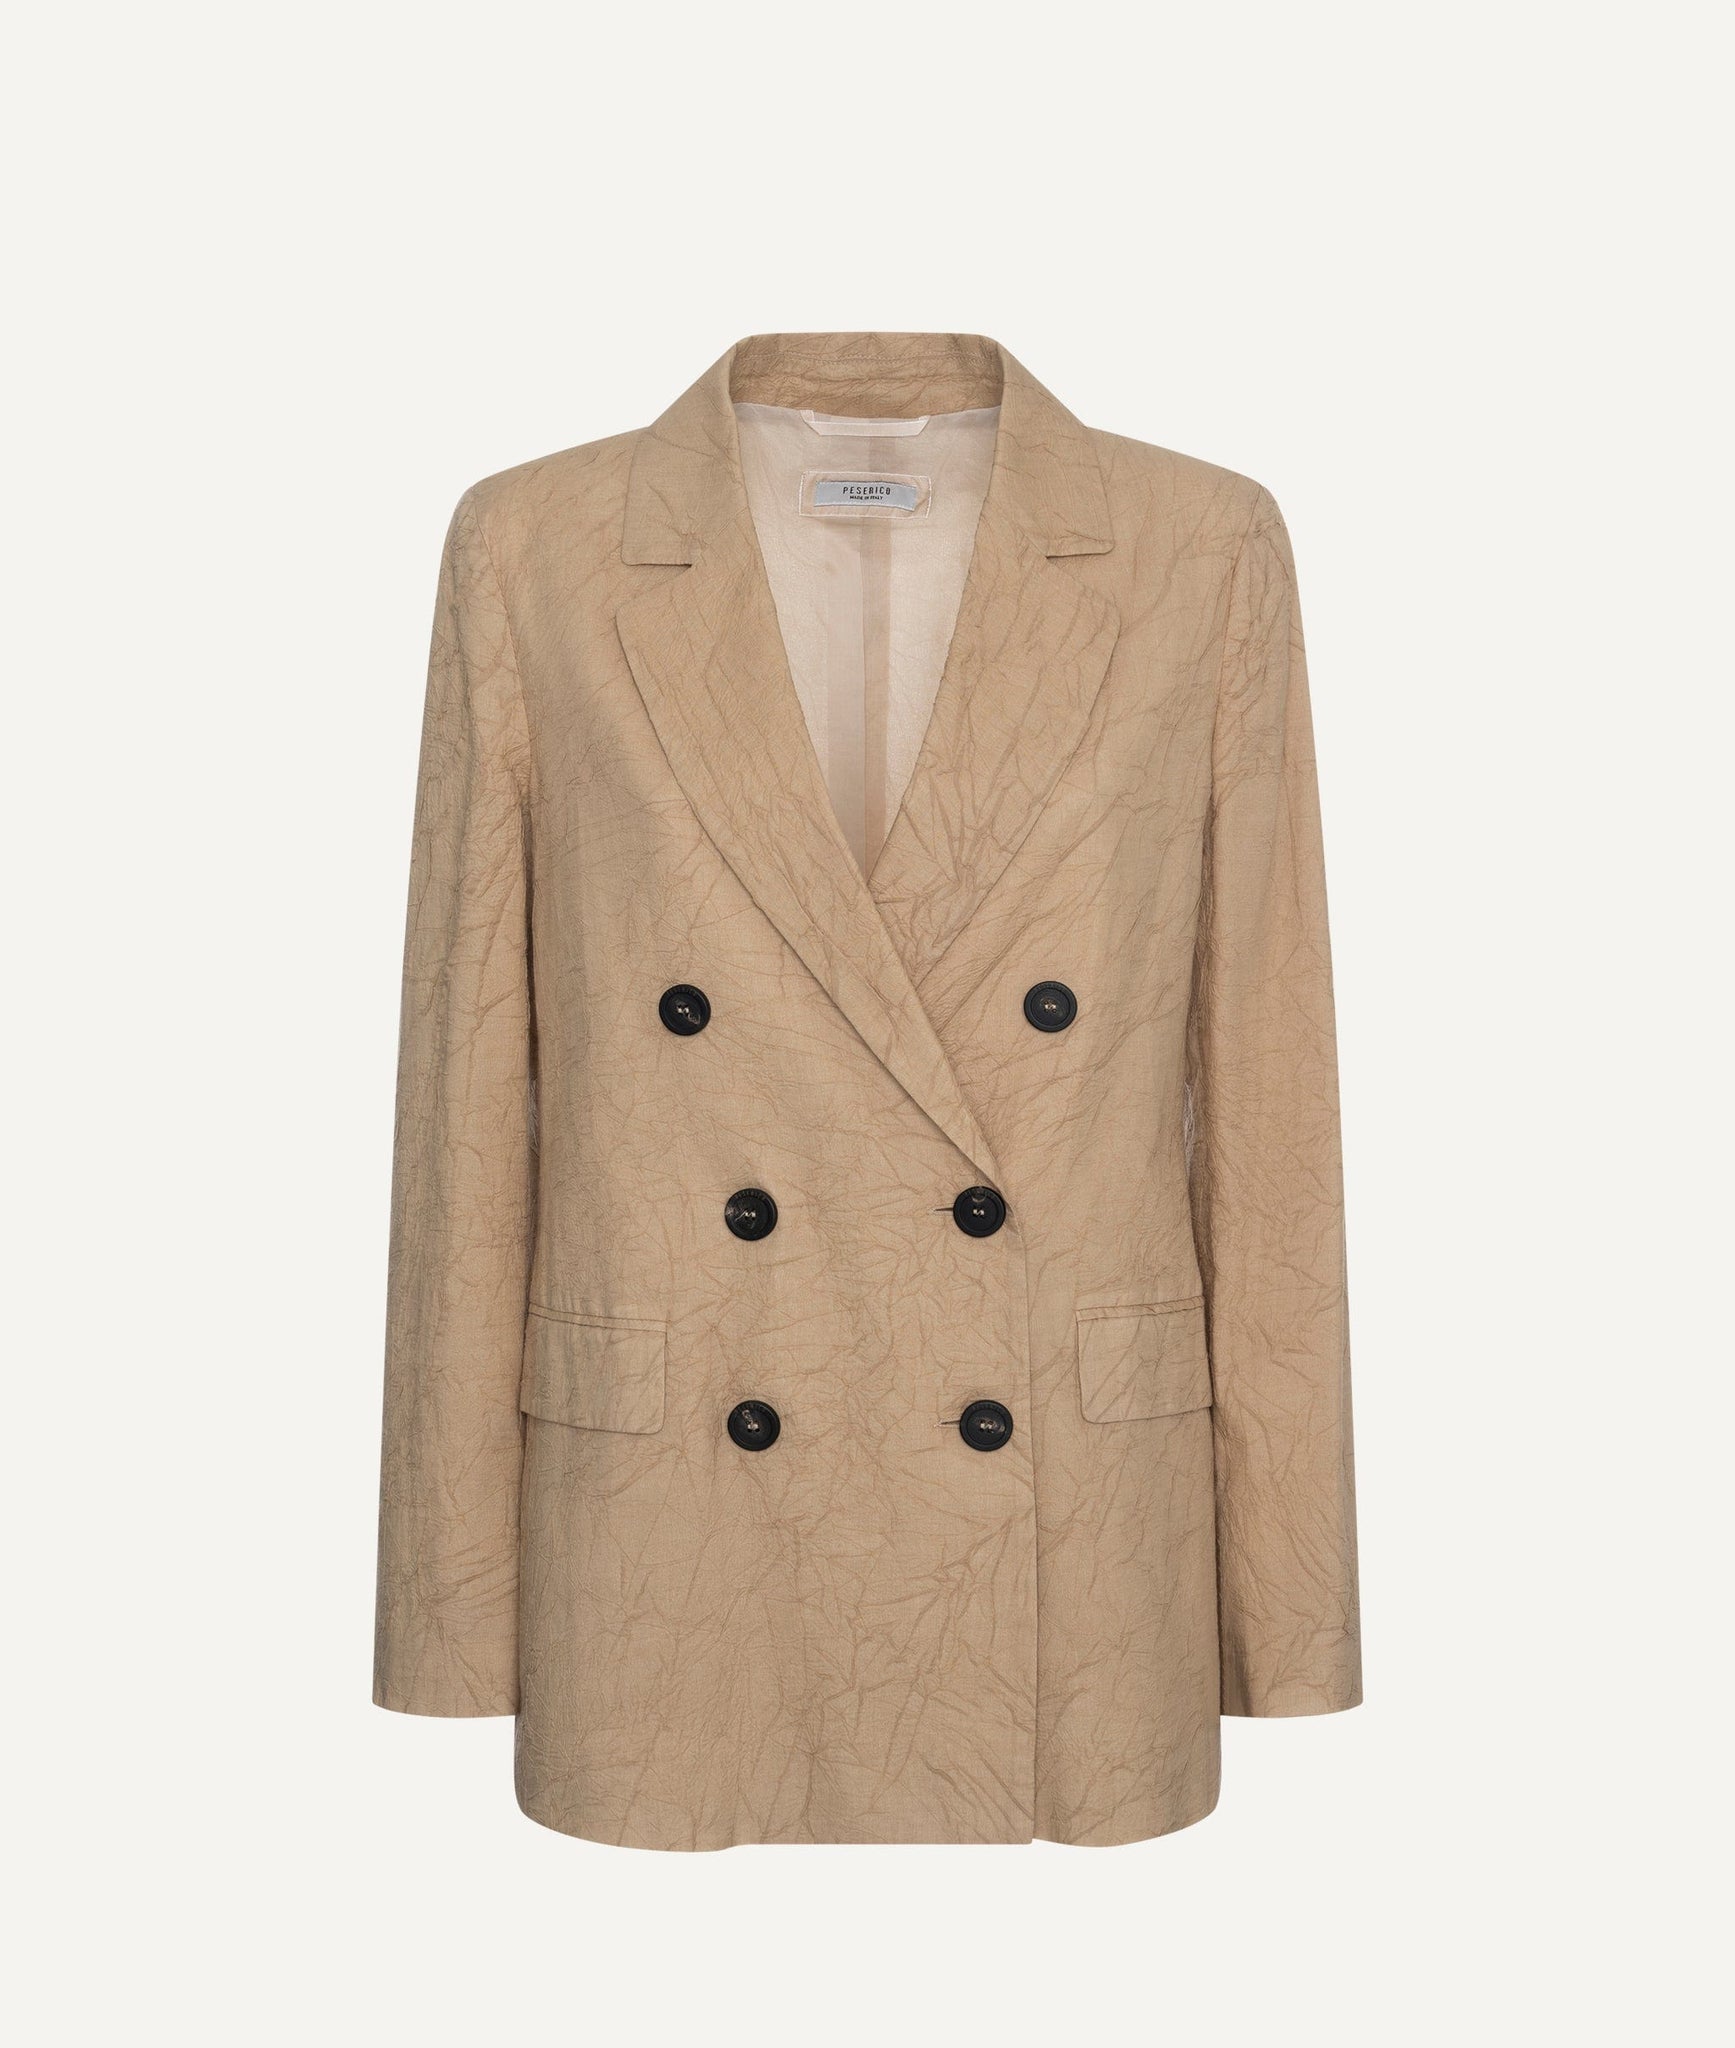 Peserico - Duble Breasted Blazer in Cotton